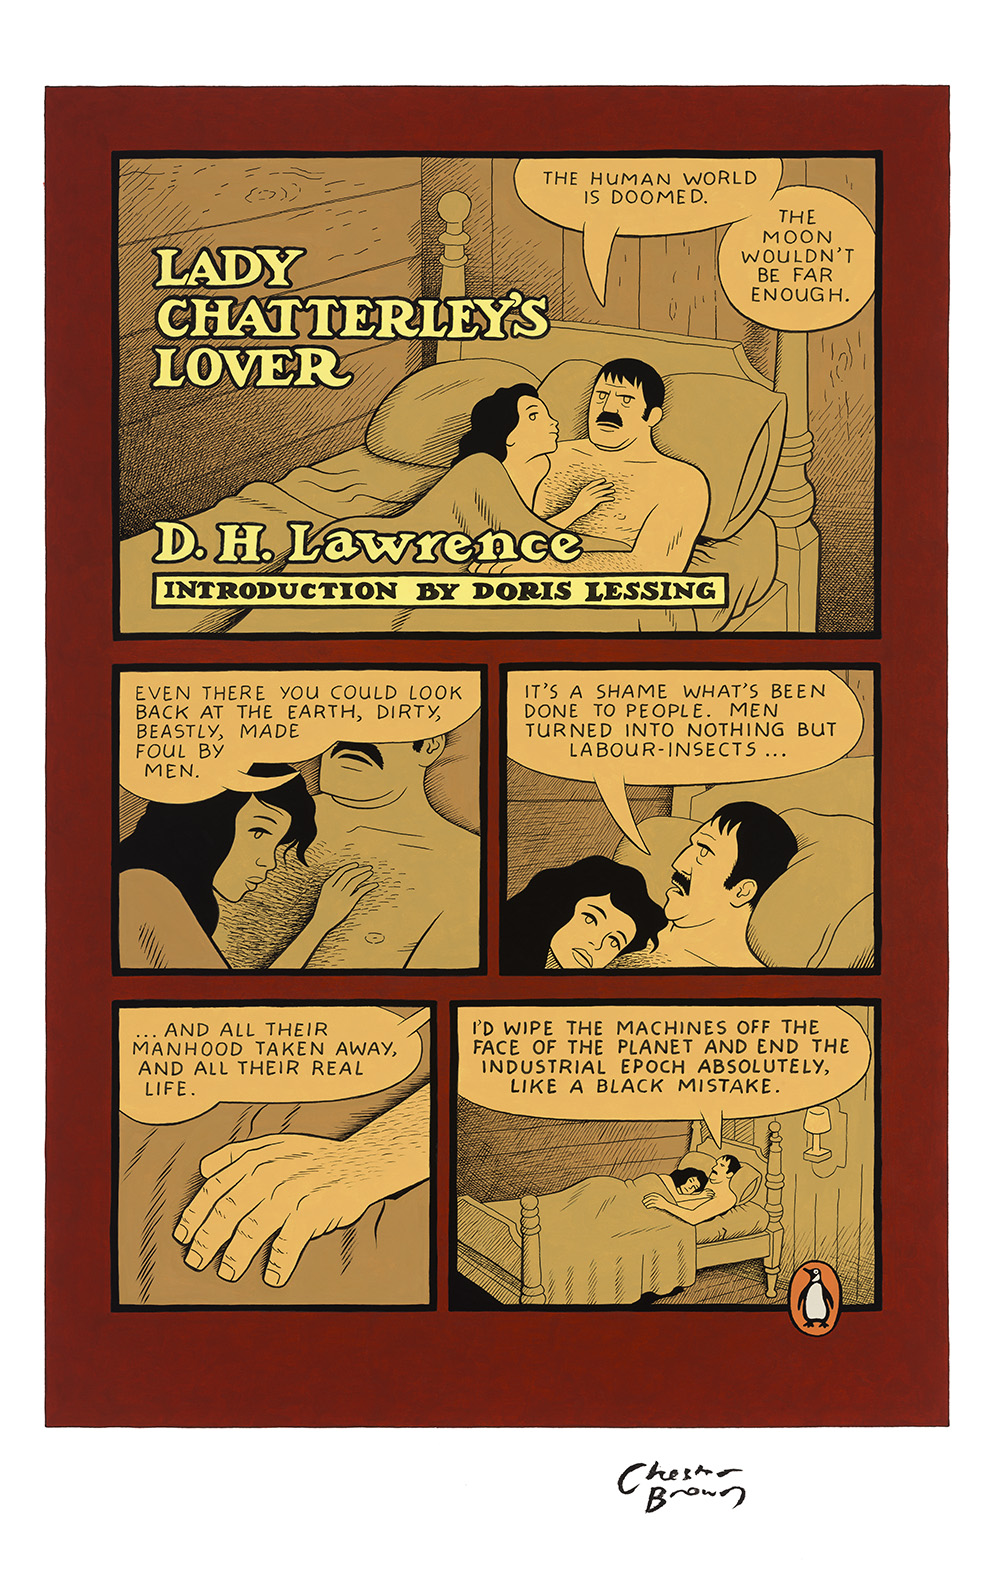 Lady Chatterley's Lover (Penguin Colouring)